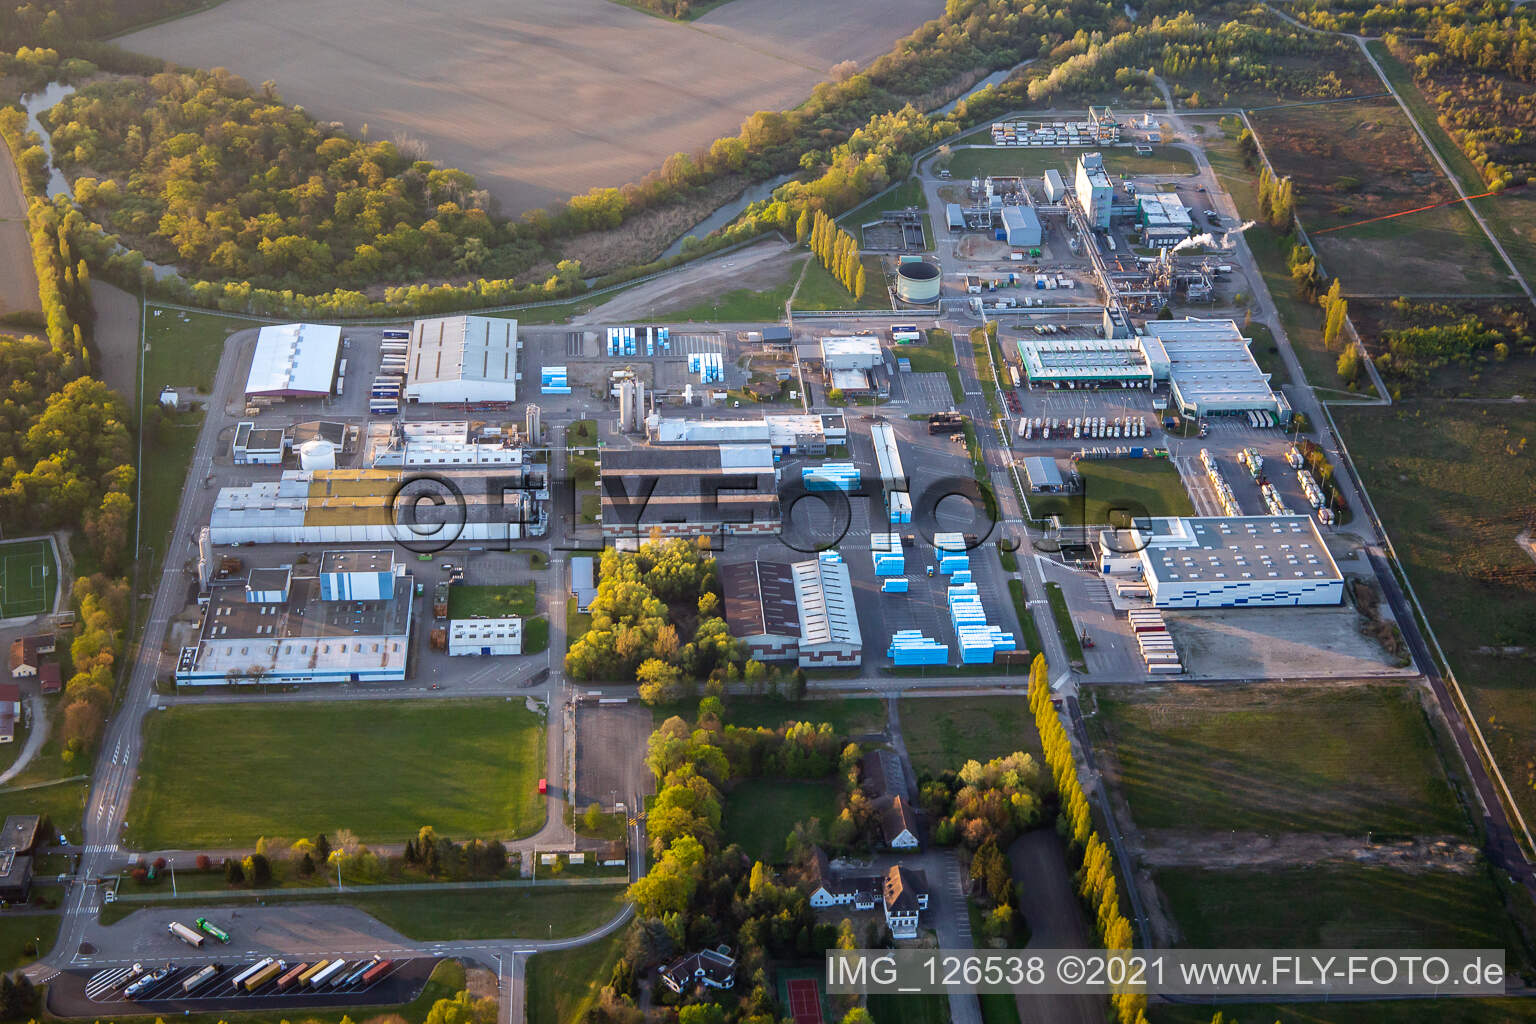 Technical facilities in the industrial area of Dow Agrosciences in Drusenheim in Grand Est, France